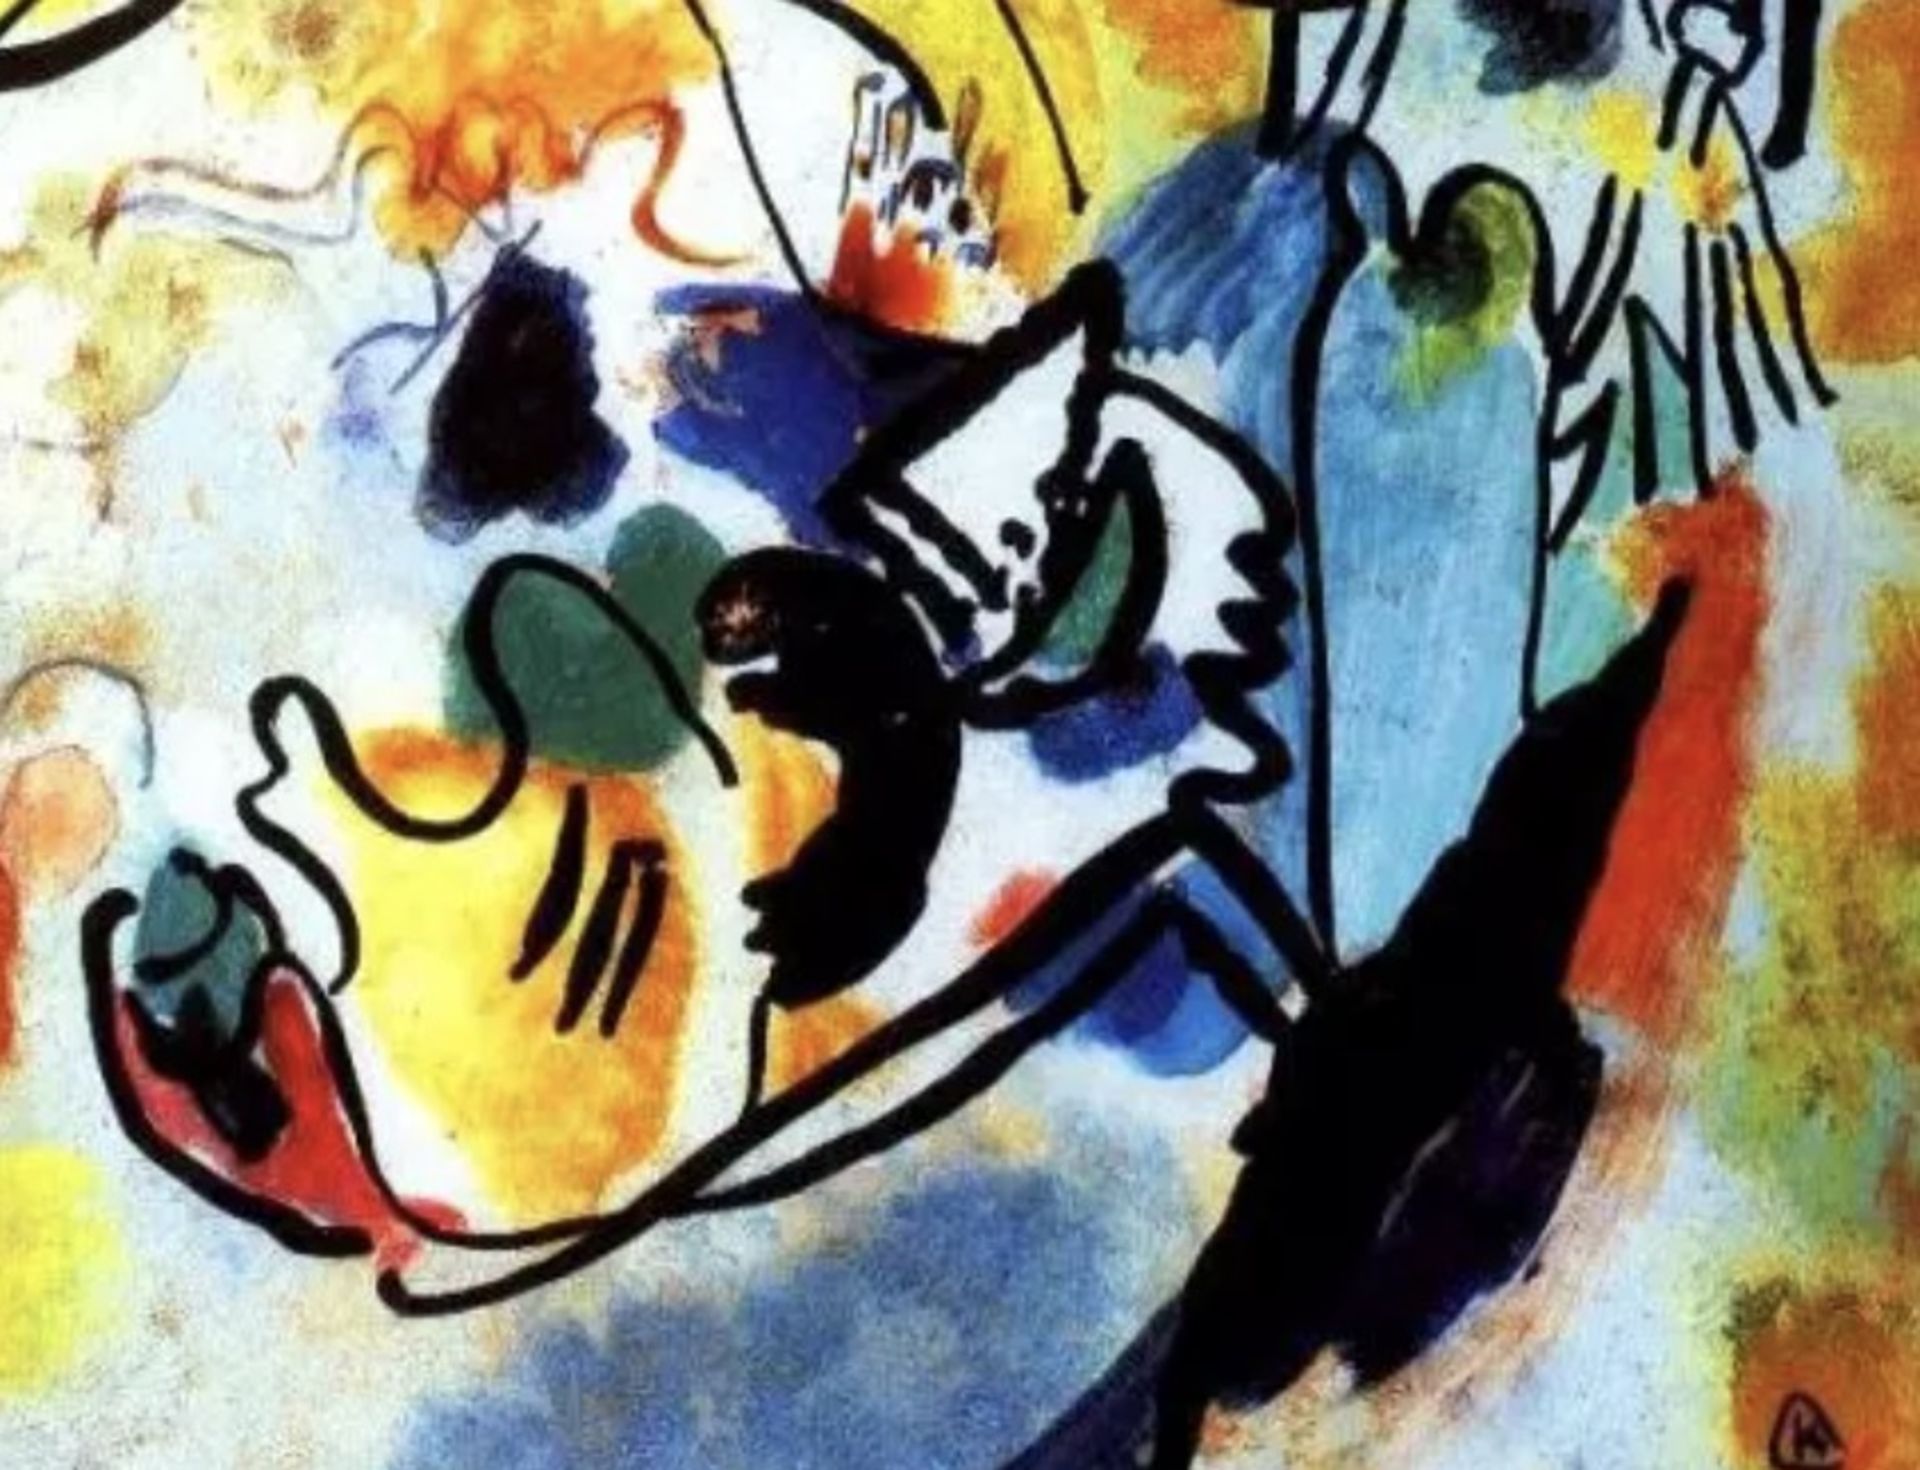 Wassily Kandinsky "Last Judgement, 1912" Oil Painting, After - Image 4 of 5